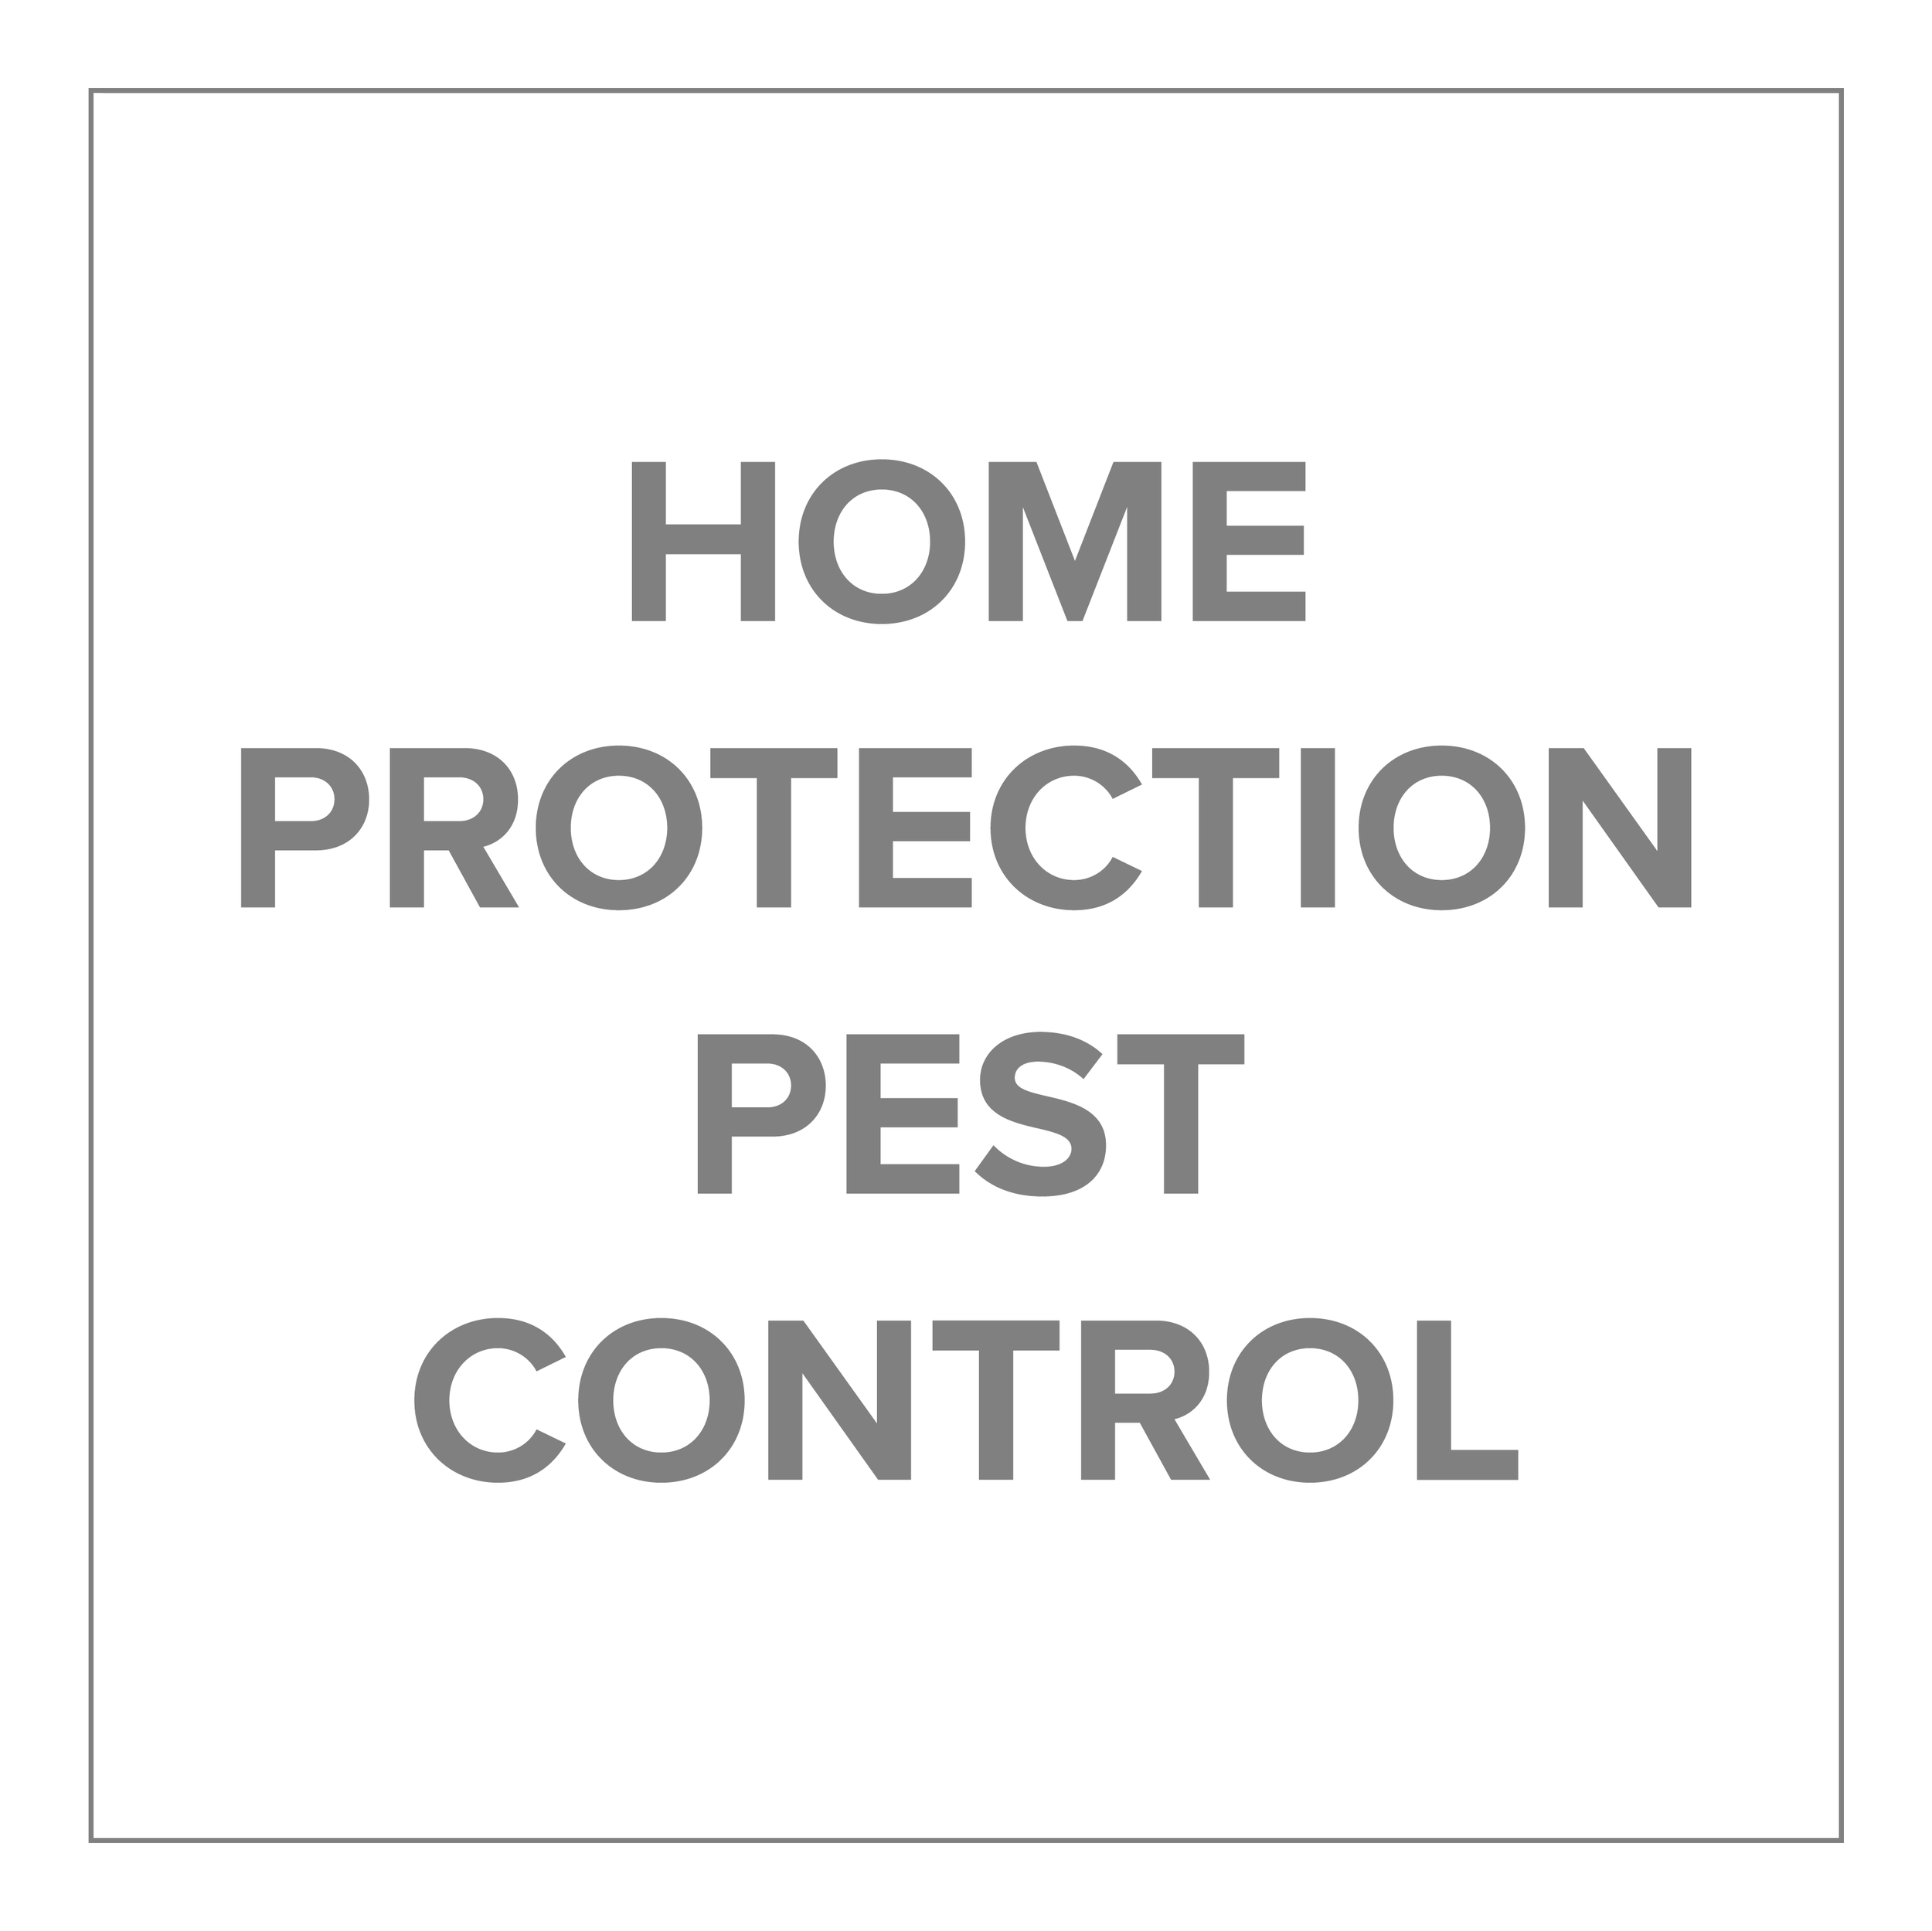 Home Protection Pest Control